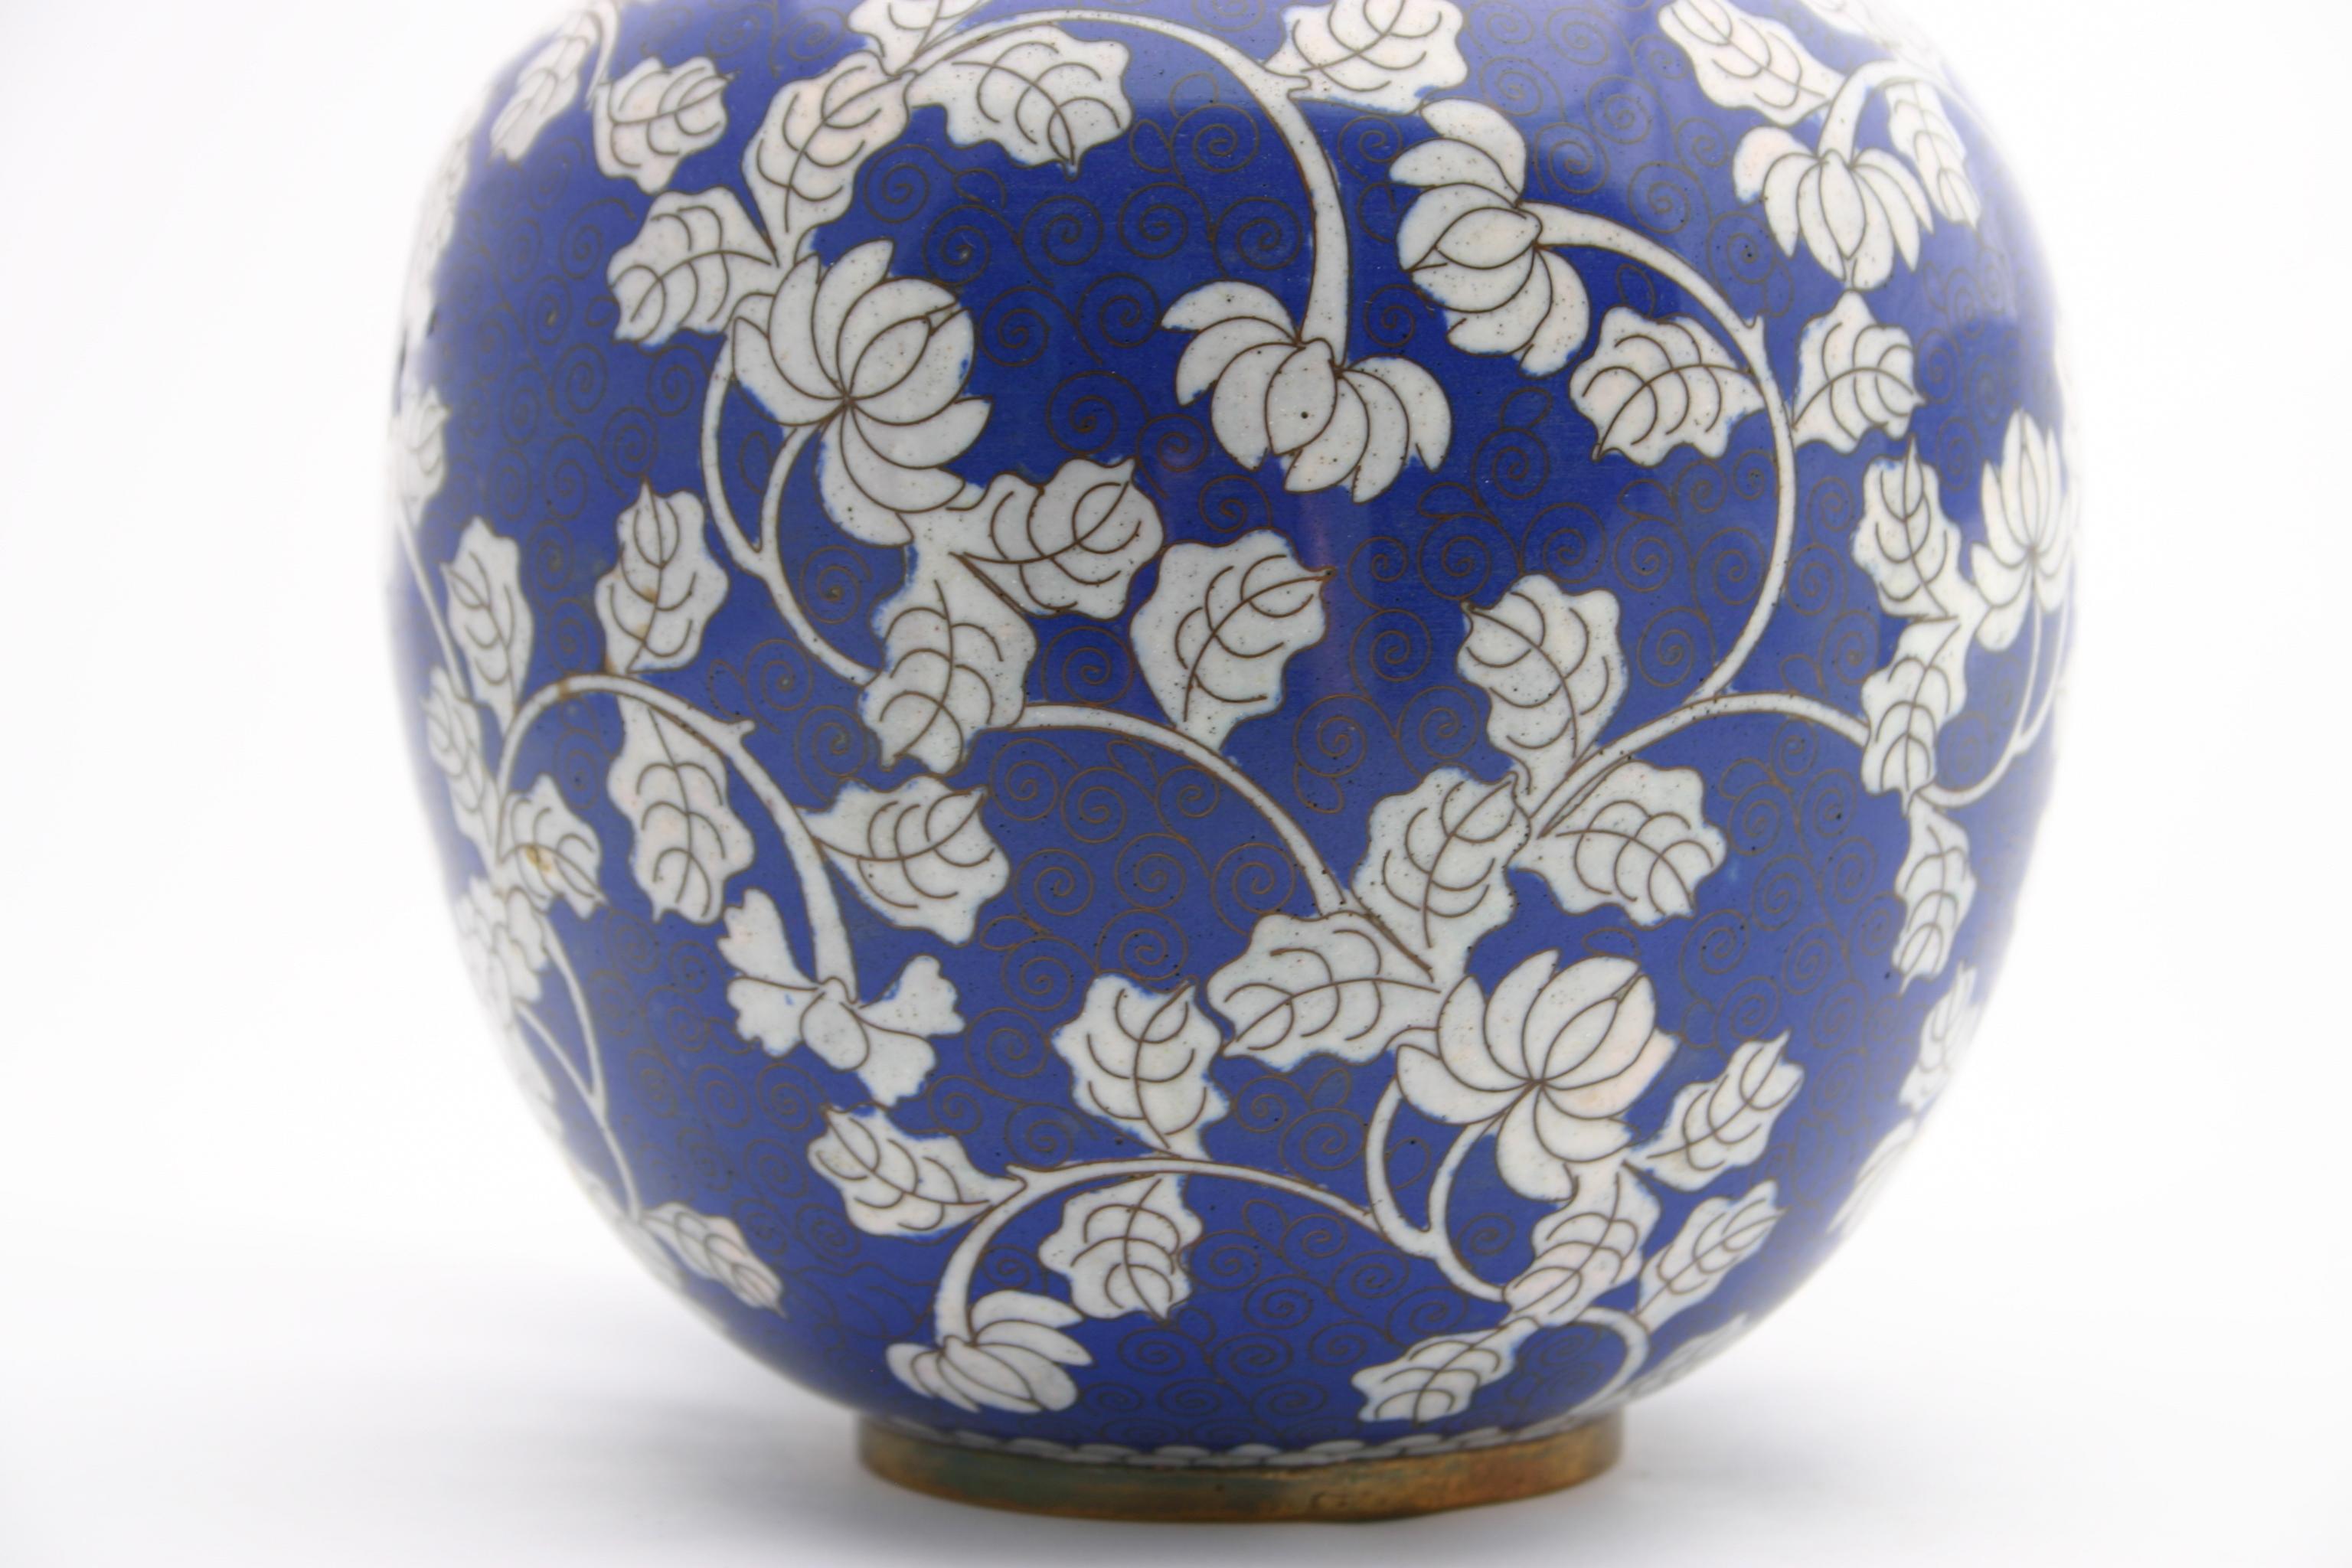 Other Antique Blue and White Chinese Cloisonné Chrysanthemum Ginger Jar